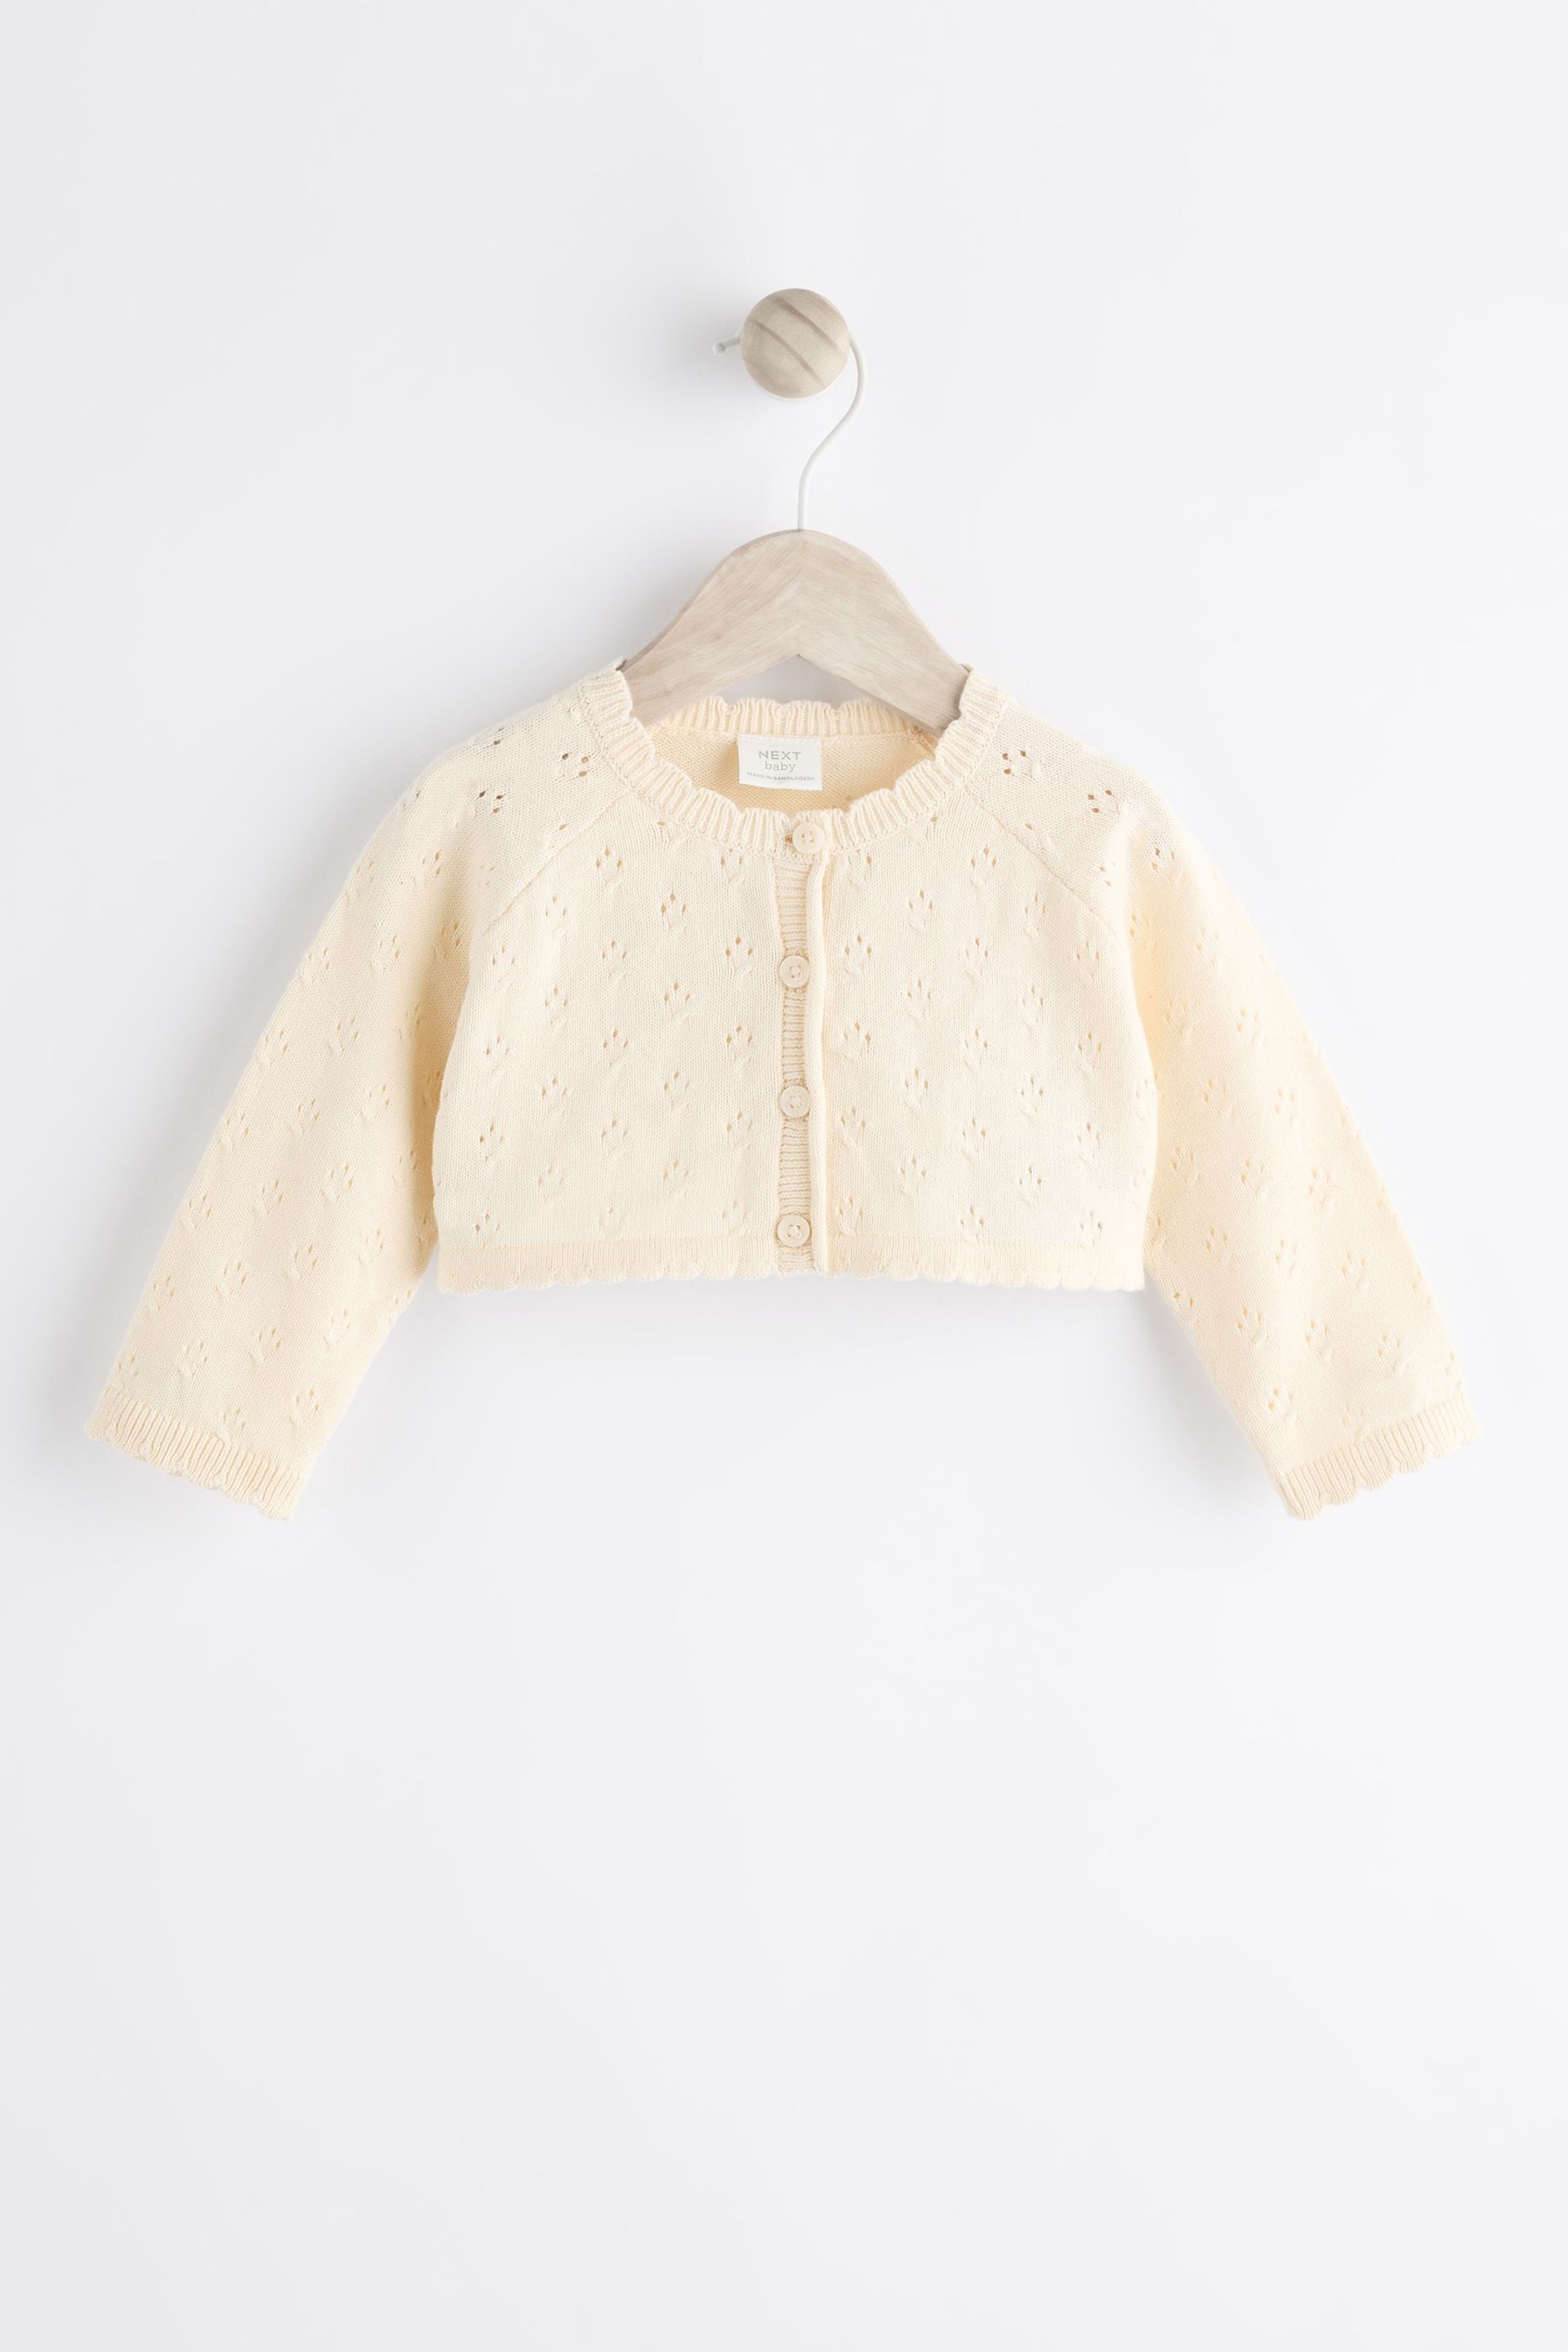 Cream Pointelle Baby Knitted Shrug Cardigan (0mths-2yrs) - Image 1 of 7